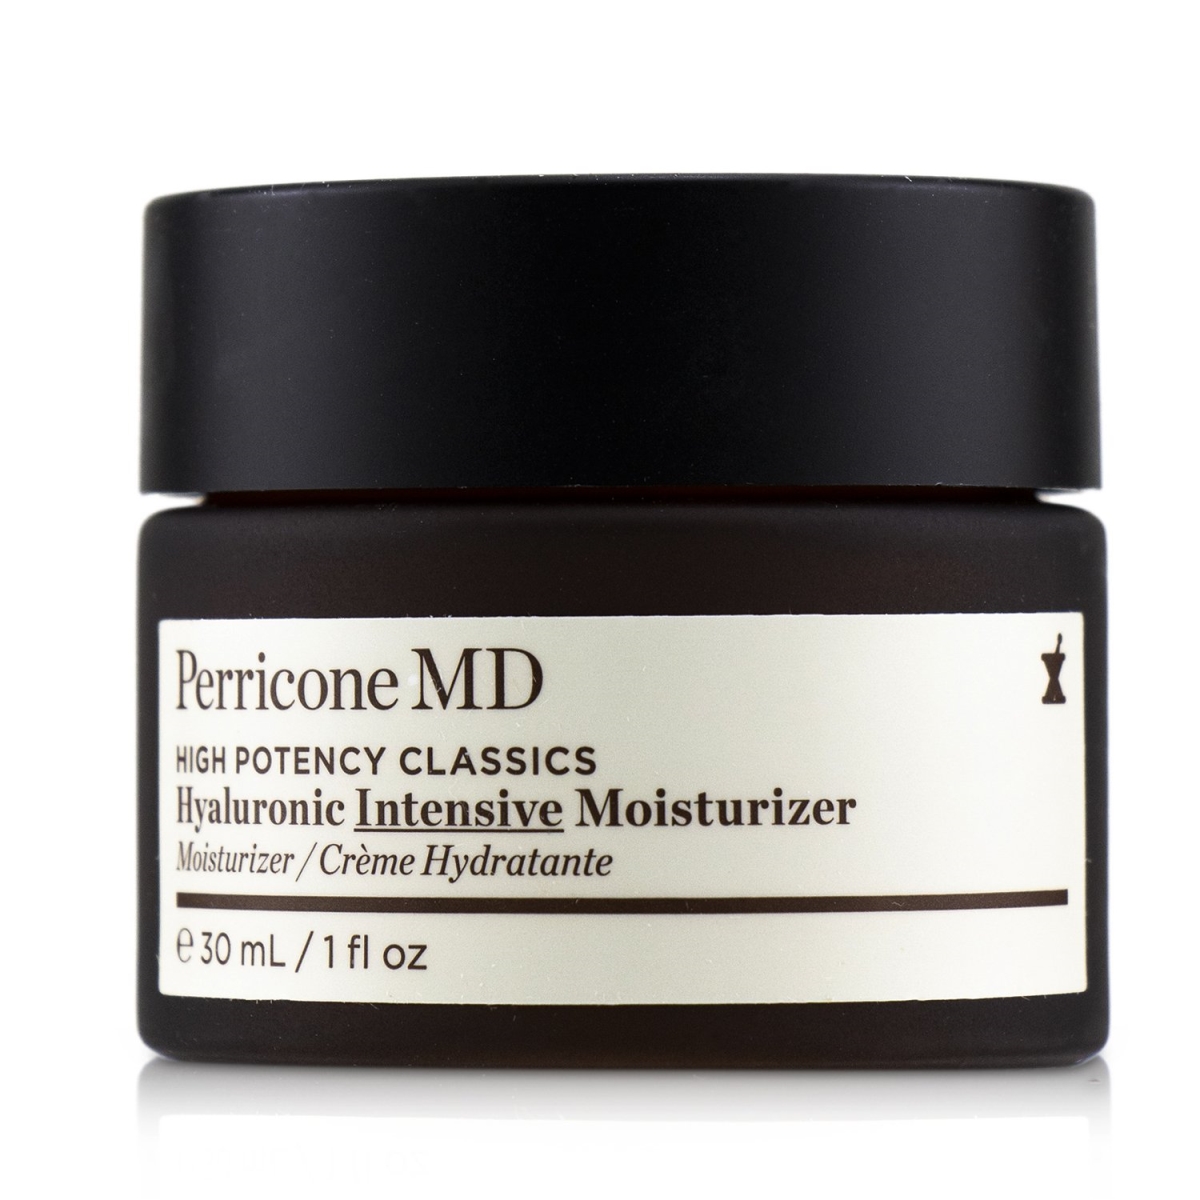 242177 1 oz High Potency Classics Hyaluronic Intensive Moisturizer -  Perricone Md